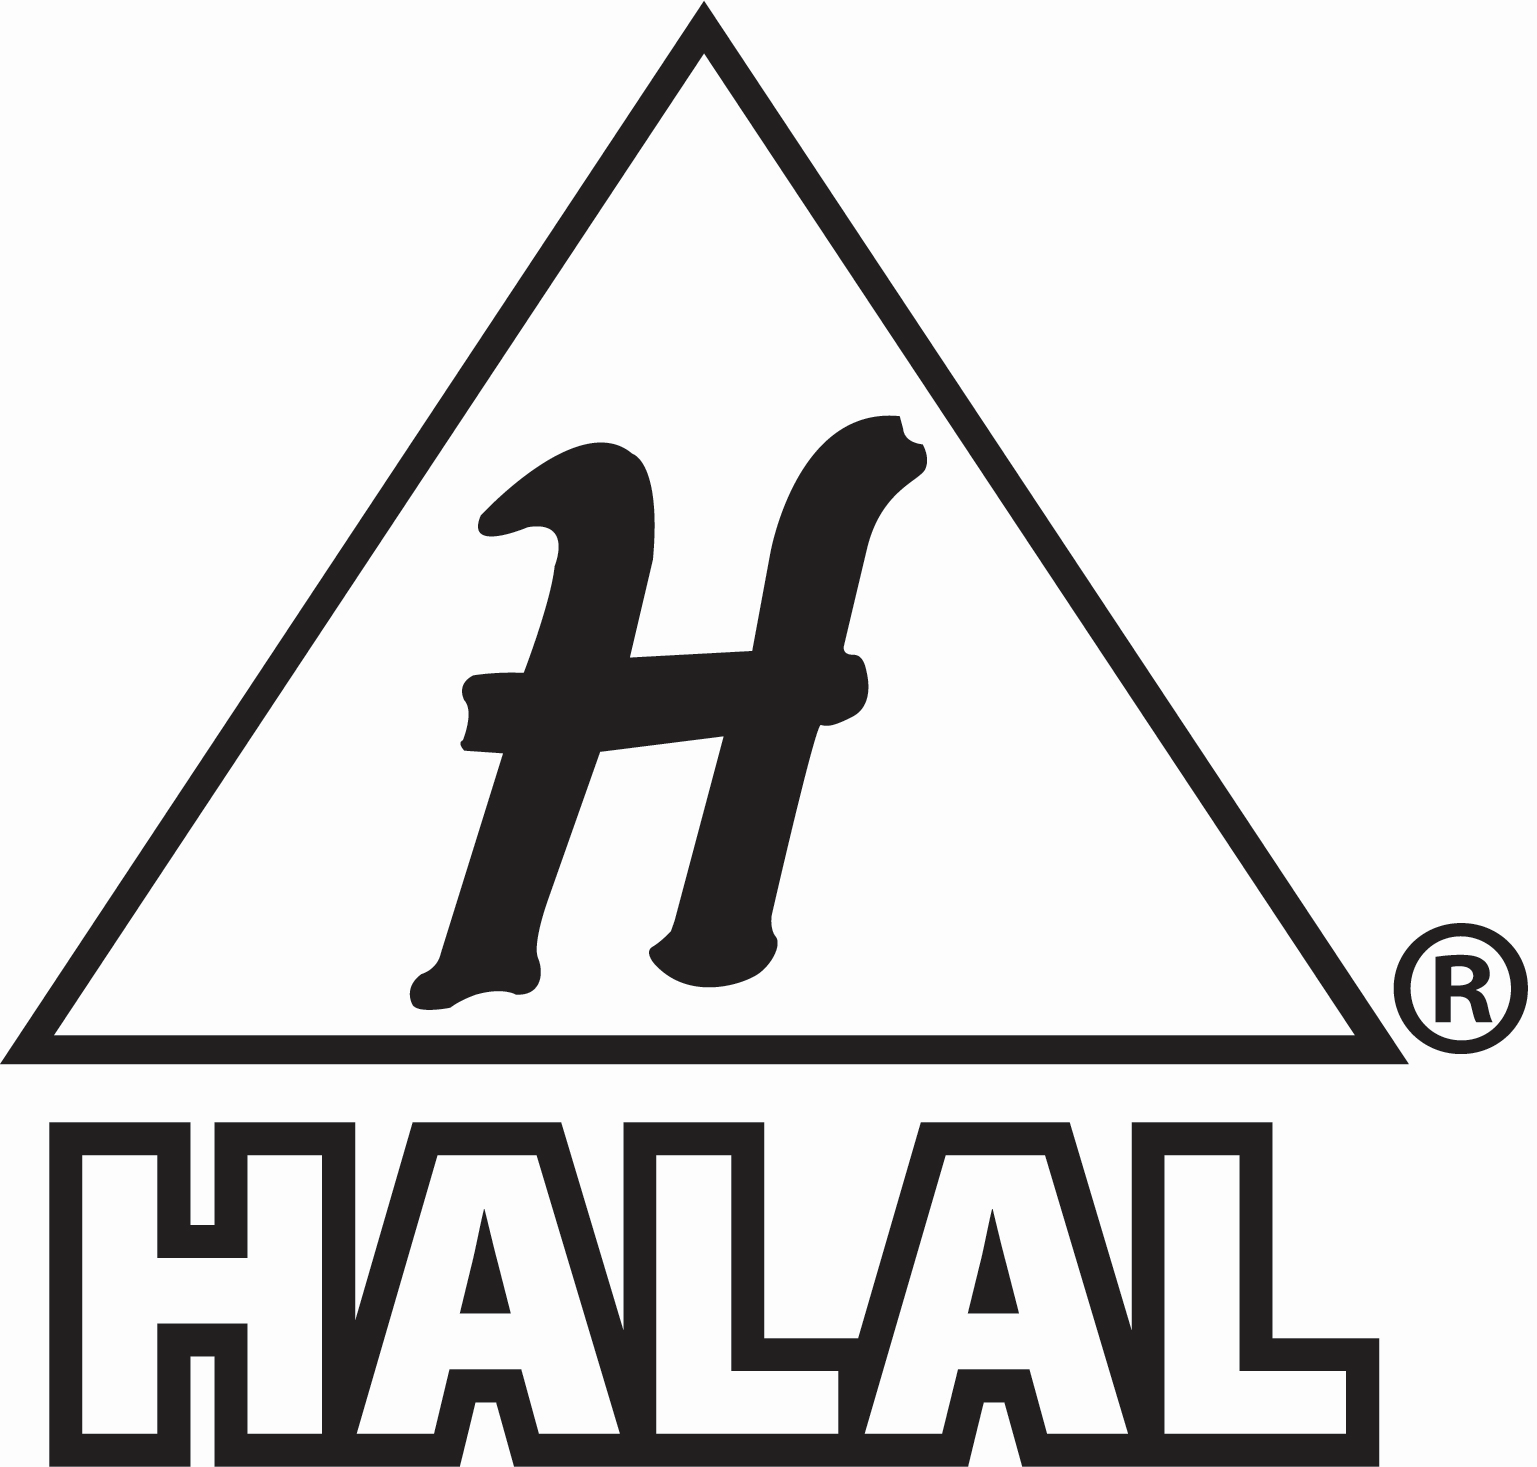 Islamic Services of America's halal-certified seal 1.